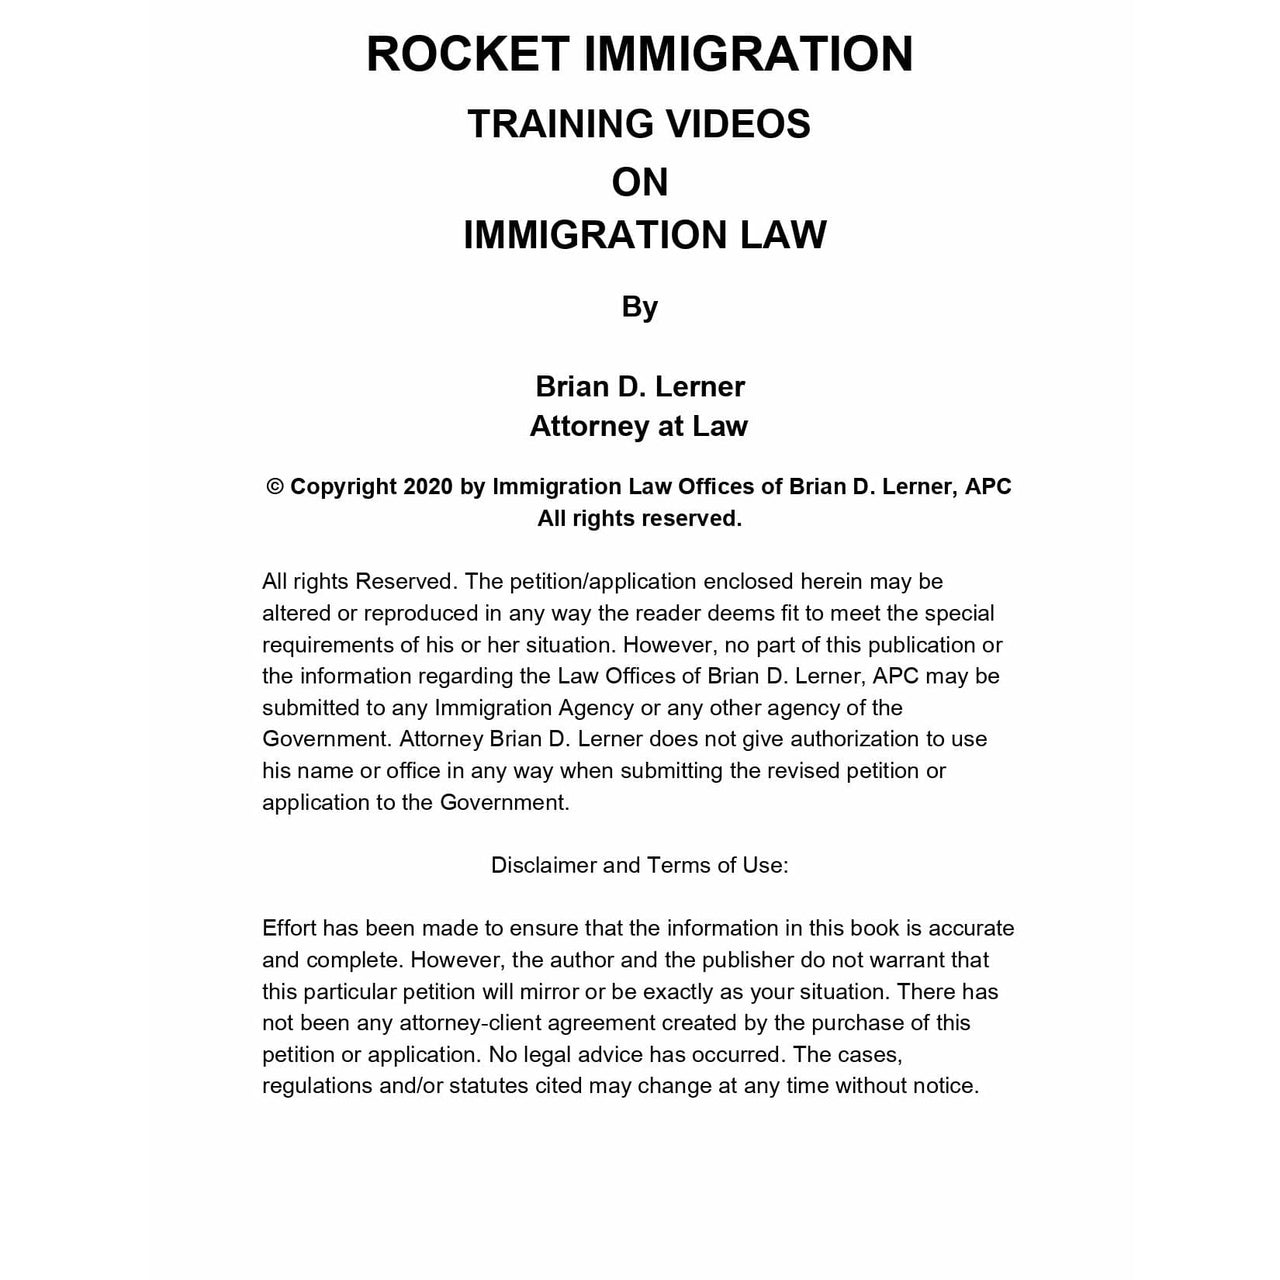 H-1B Specialty Occupation Visa Training Course Access Packet - Rocket Immigration Petitions